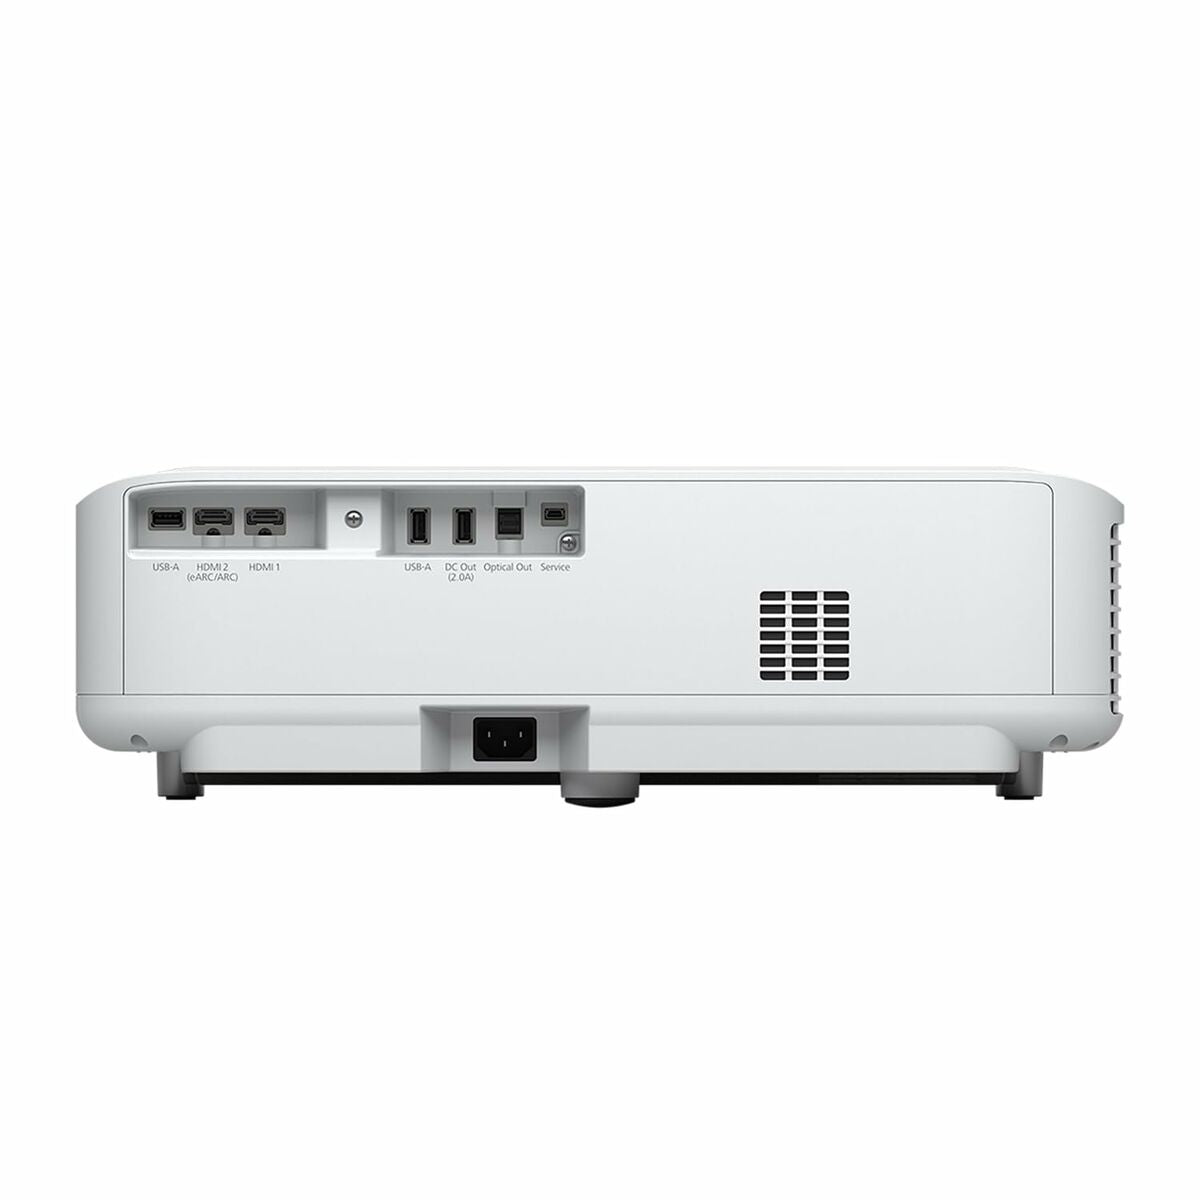 Projector Epson V11HB07040 3600 ANSI 4K Ultra HD, Epson, Electronics, TV, Video and home cinema, projector-epson-v11hb07040-3600-ansi-4k-ultra-hd, :Ultra HD, Brand_Epson, category-reference-2609, category-reference-2642, category-reference-2947, category-reference-t-18805, category-reference-t-18811, category-reference-t-19653, cinema and television, computers / peripherals, Condition_NEW, entertainment, office, Price_+ 1000, RiotNook